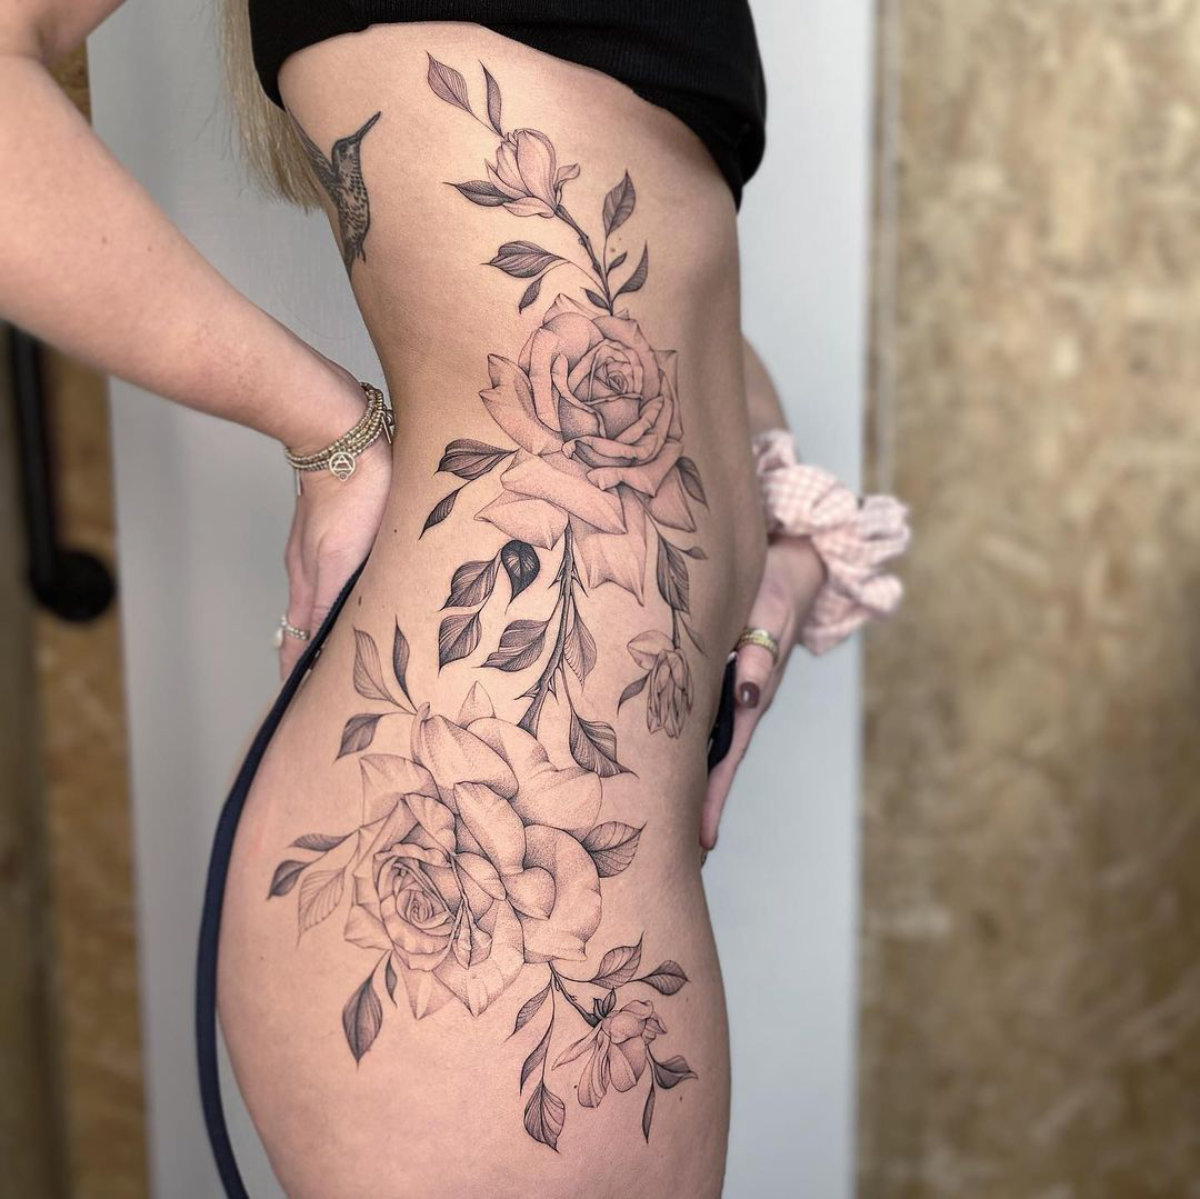 101 Best Front Hip Tattoo Ideas That Will Blow Your Mind!